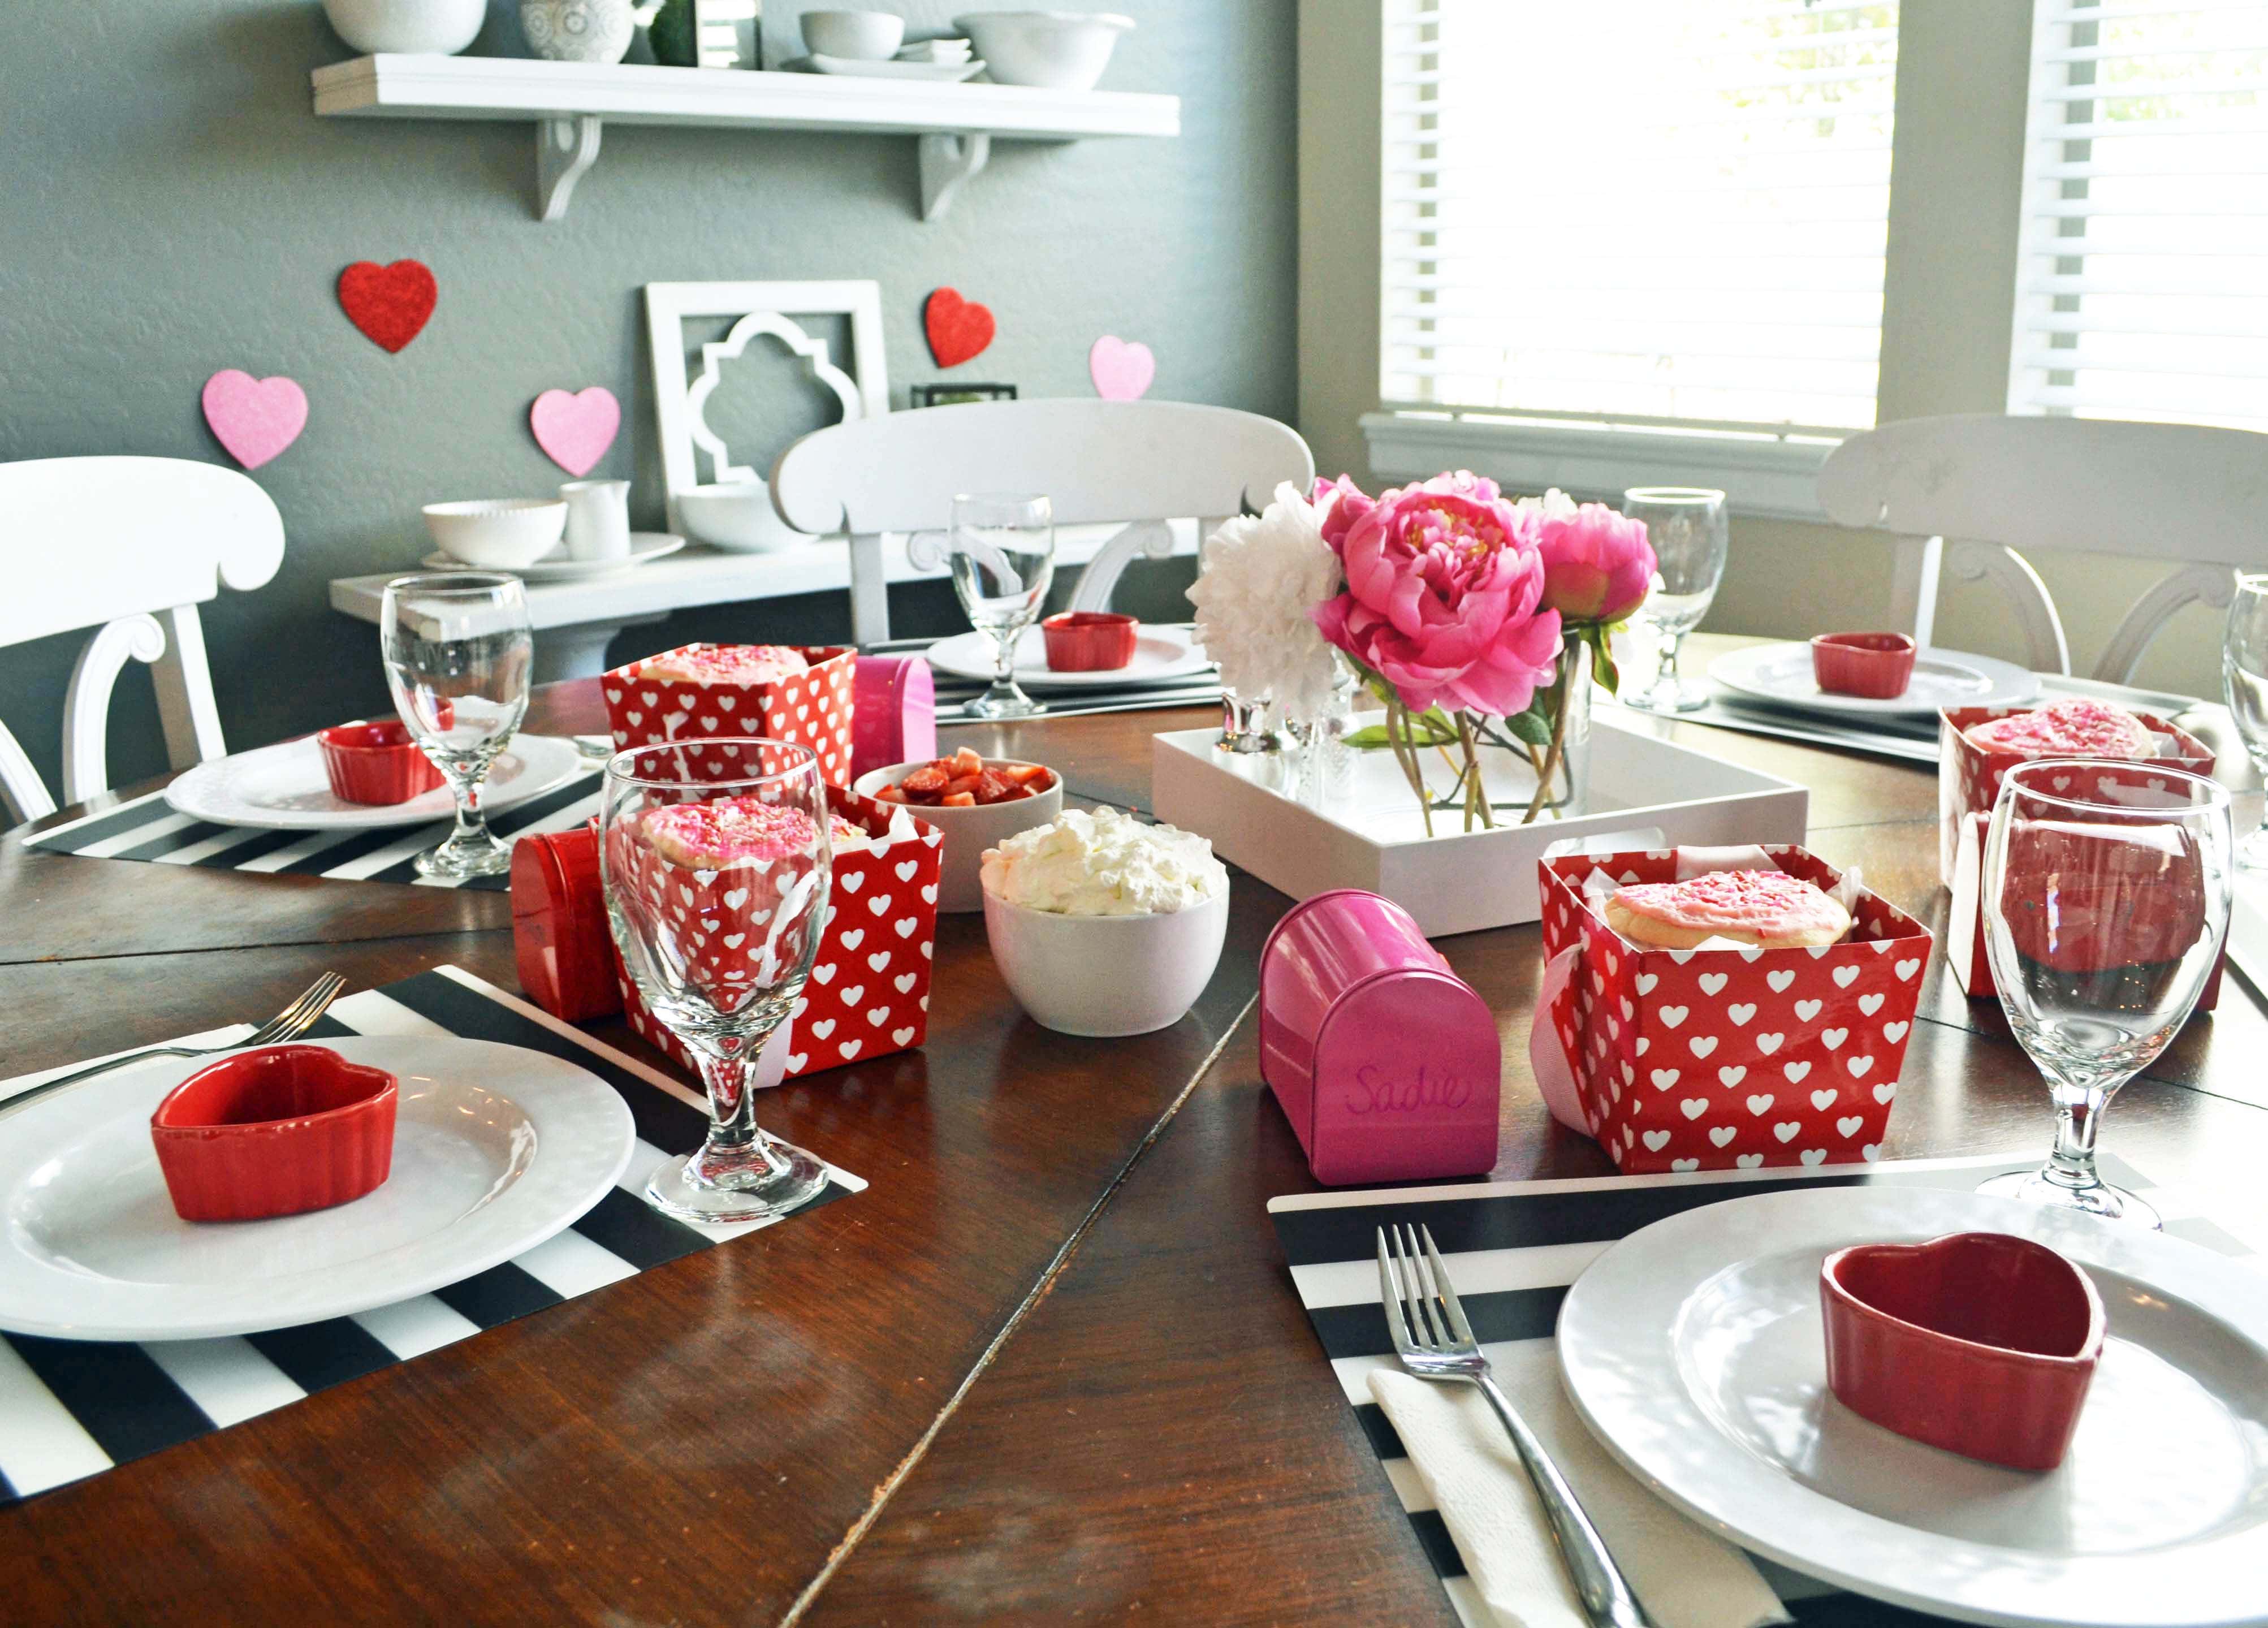 5 ways to make Valentine's Day special for kids